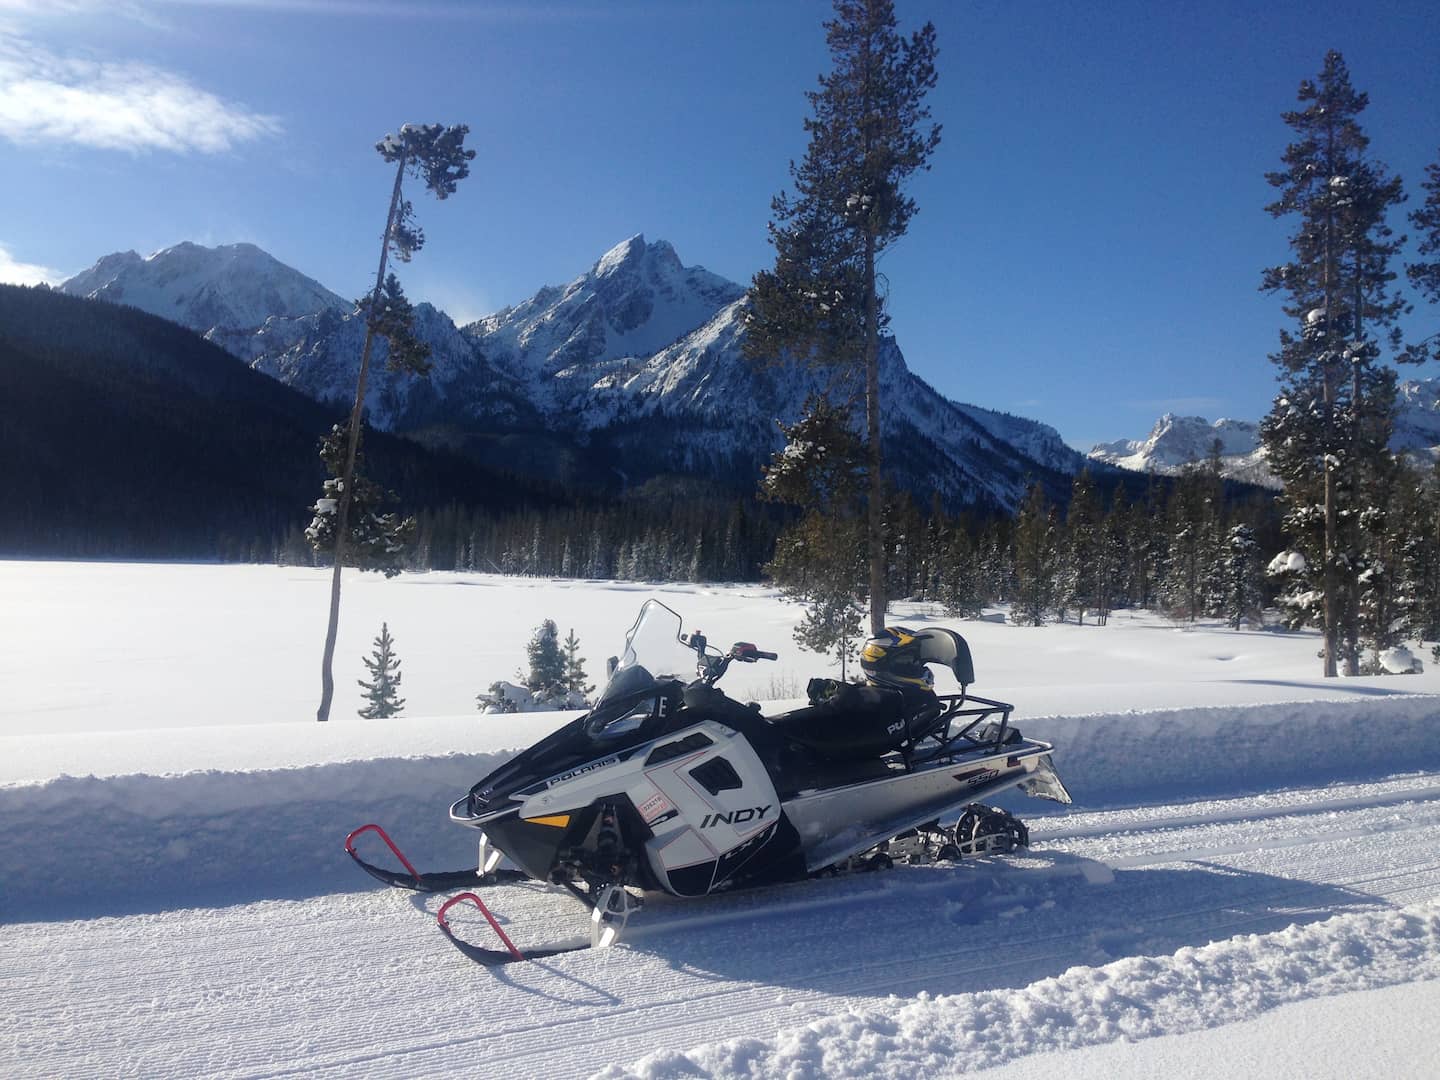 Snowmobile on a road in front of a mountain